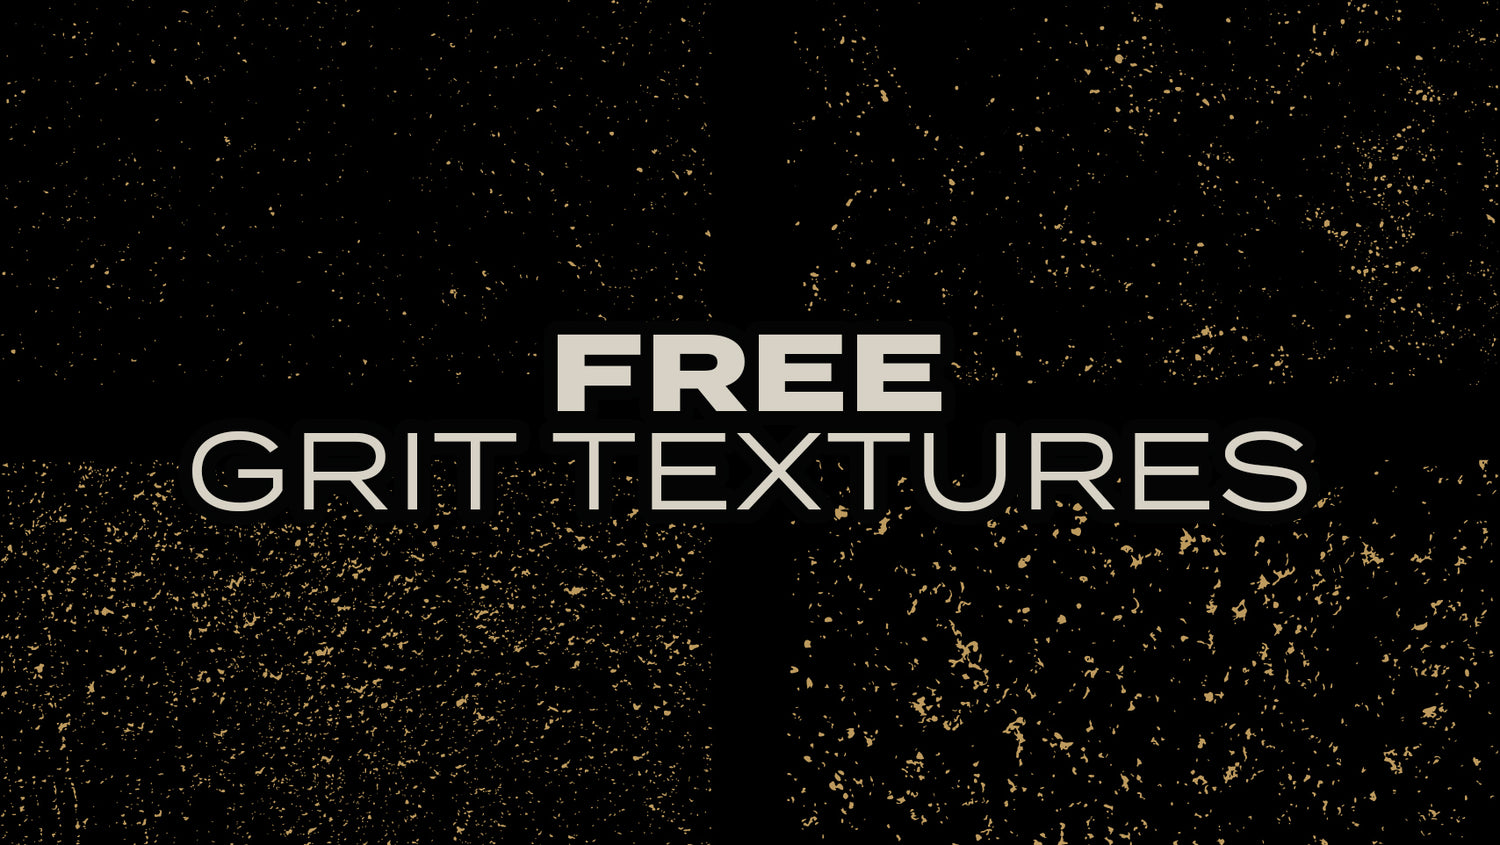 Free vector grit textures